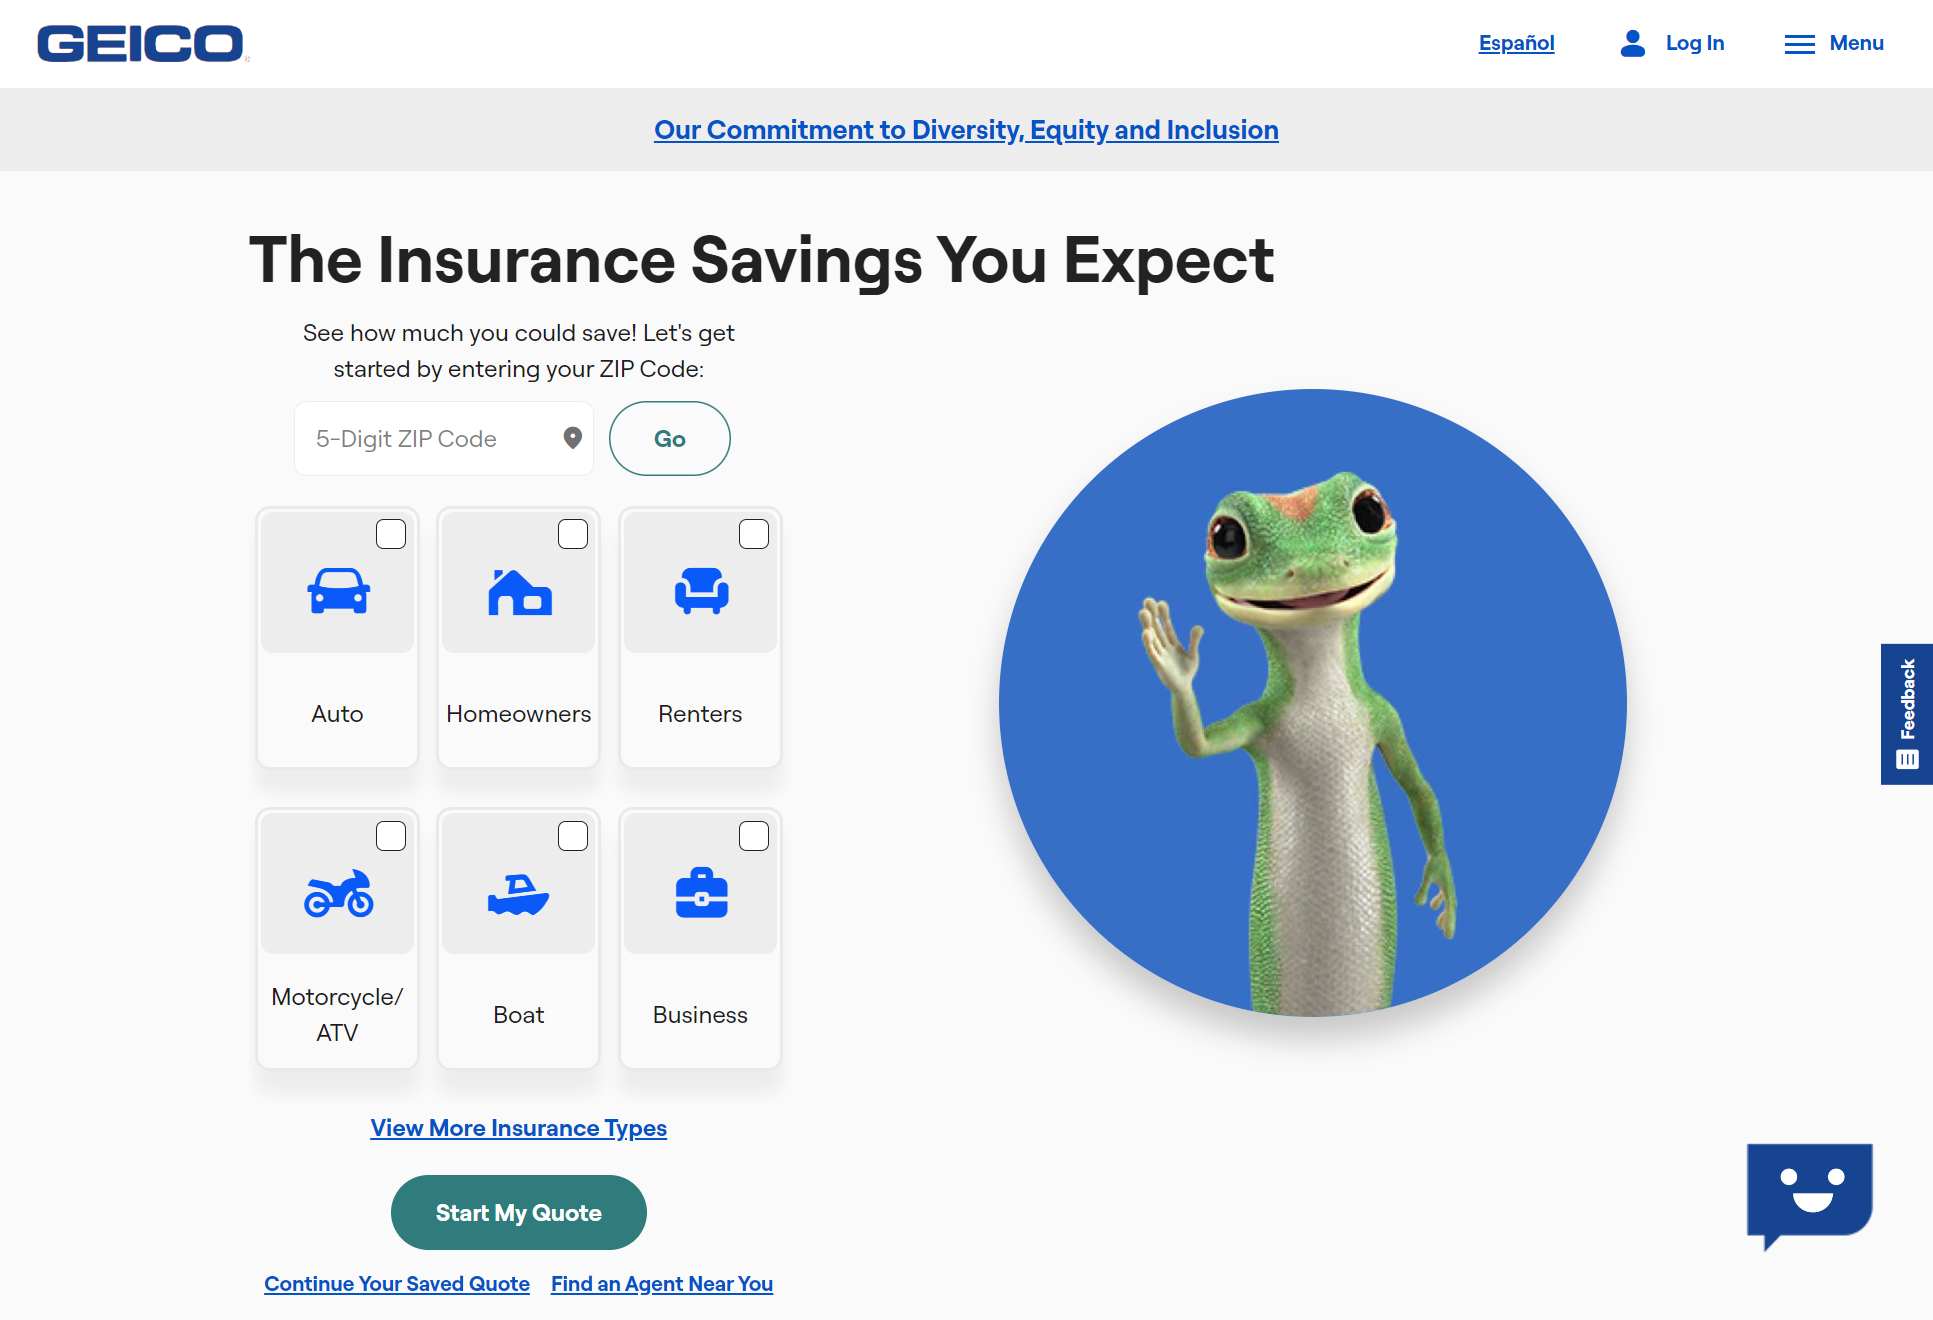 geico homepage: Best Auto Insurance for Turbo Cars